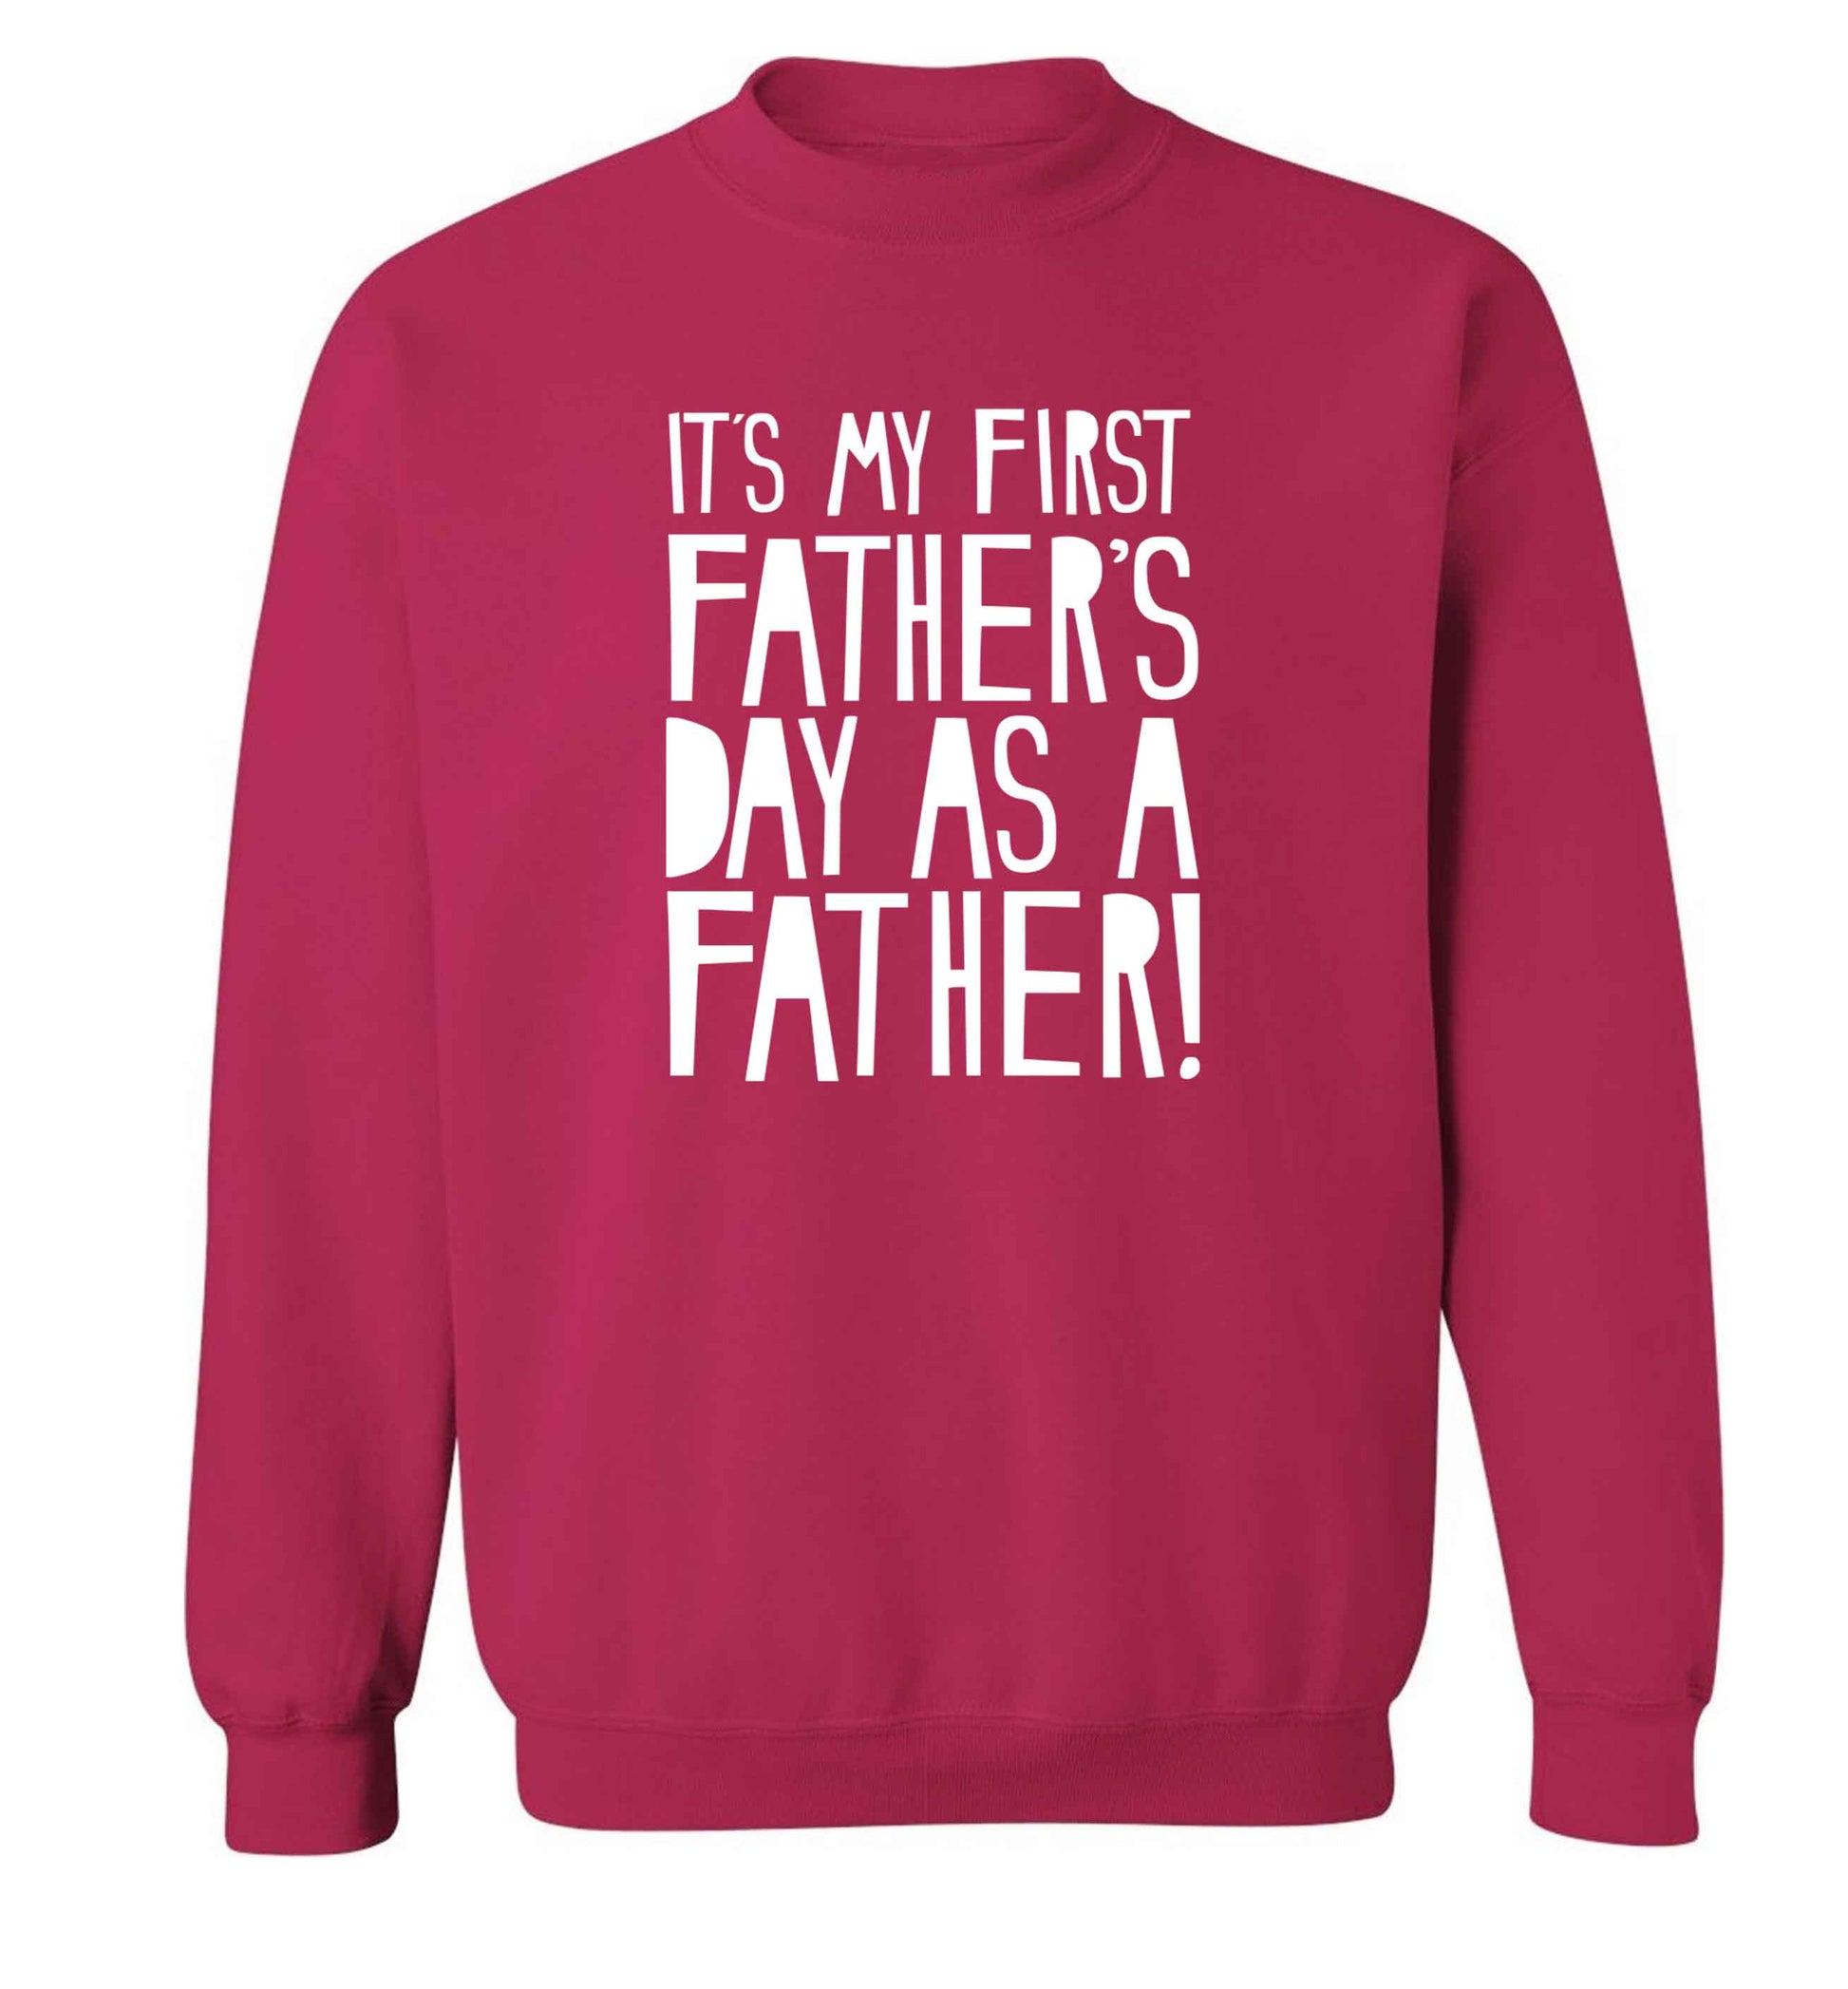 It's my first father's day as a father! adult's unisex pink sweater 2XL